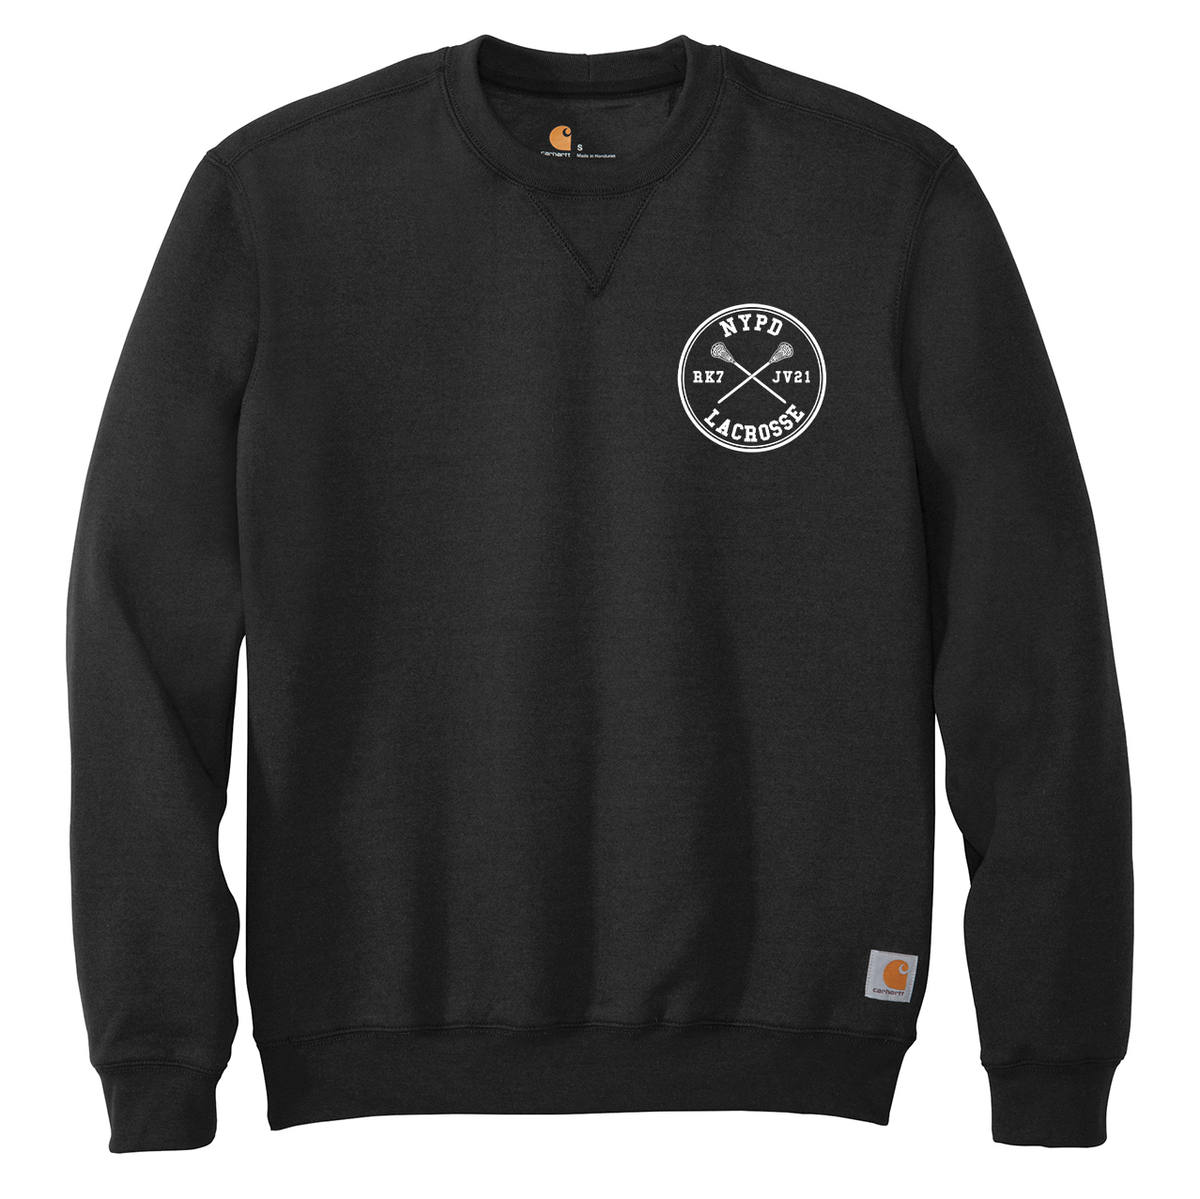 NYPD Lacrosse Midweight Crewneck